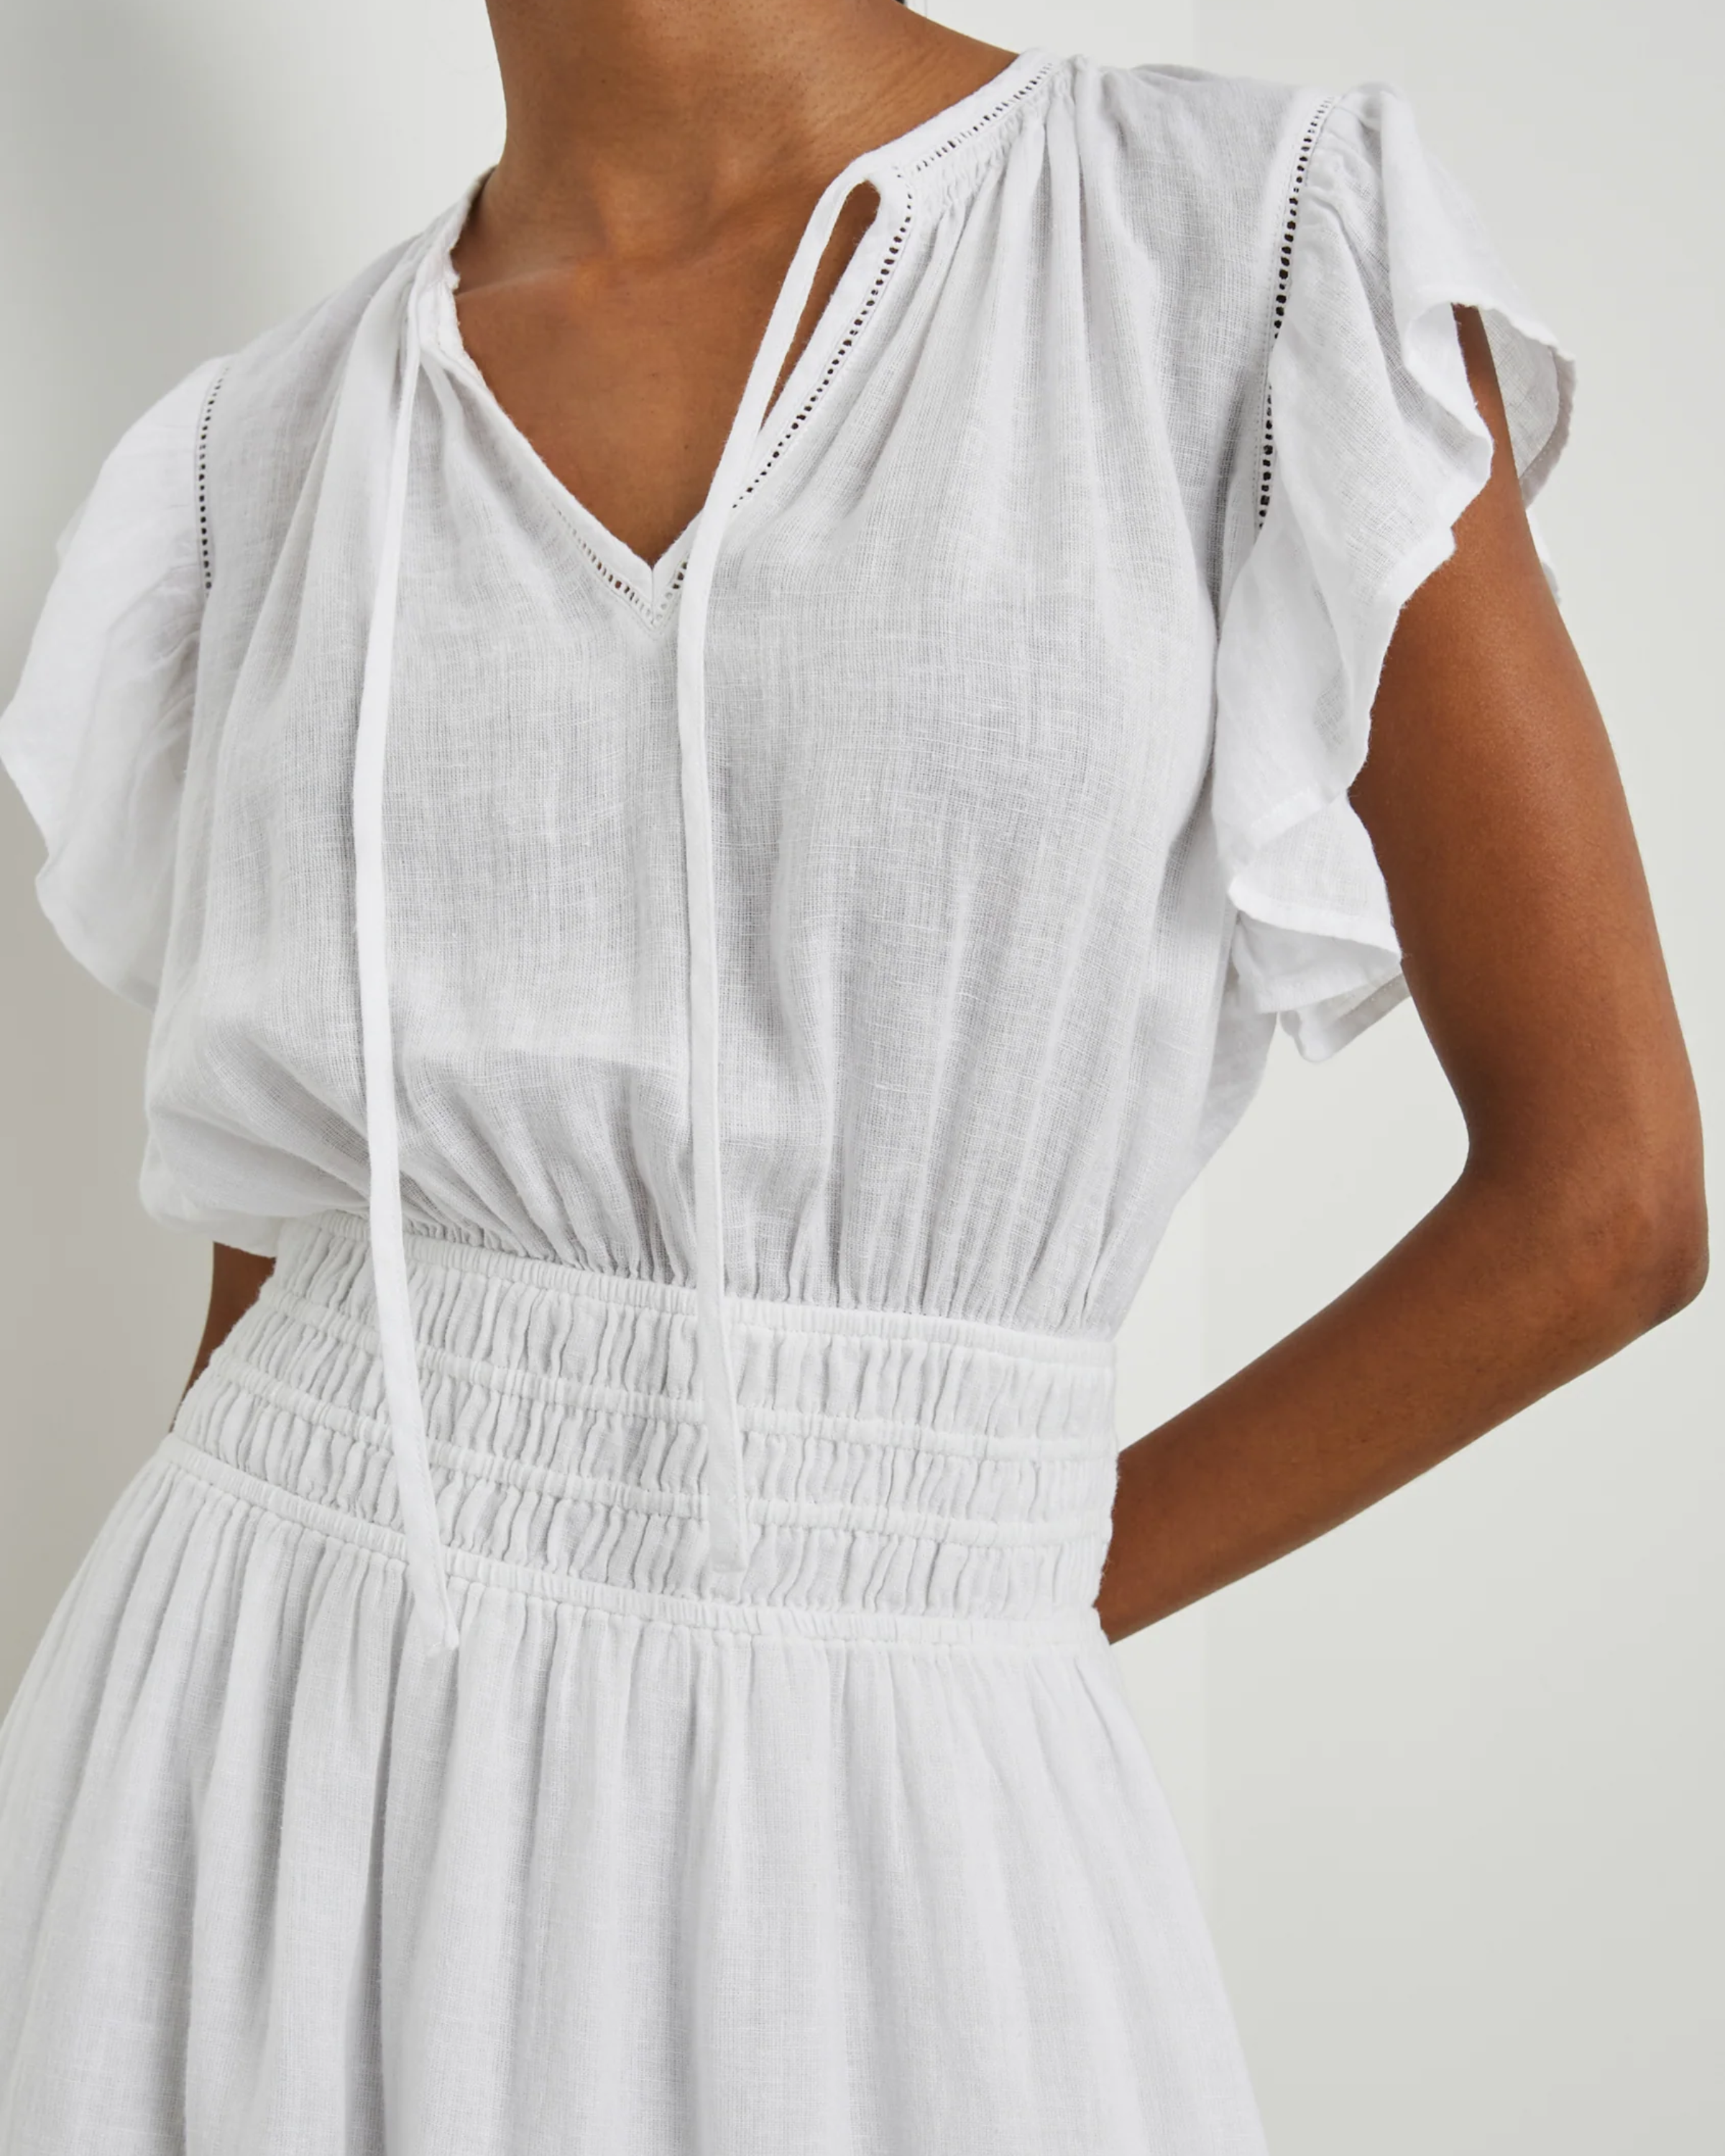 Rails Iona Dress in White Lace Detail